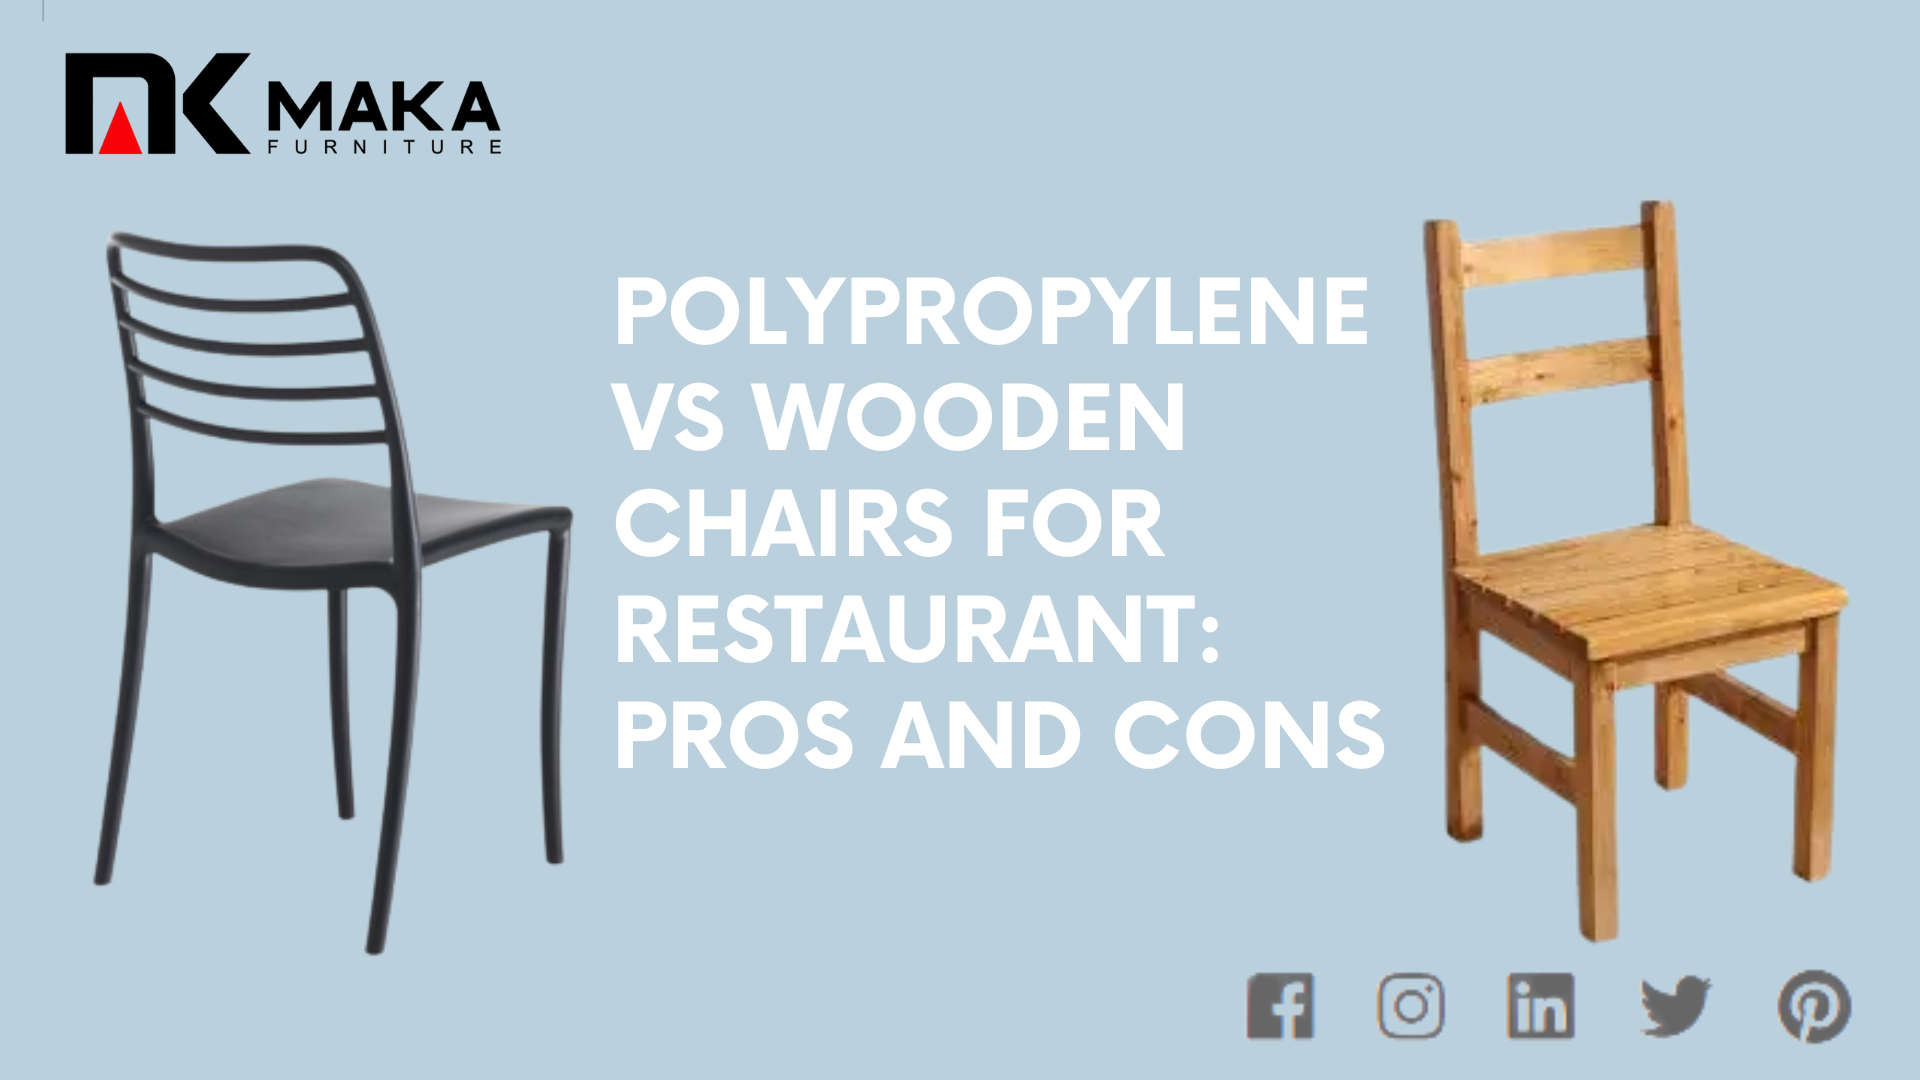 Polypropylene vs Wooden Chairs for Restaurant Pros and Cons